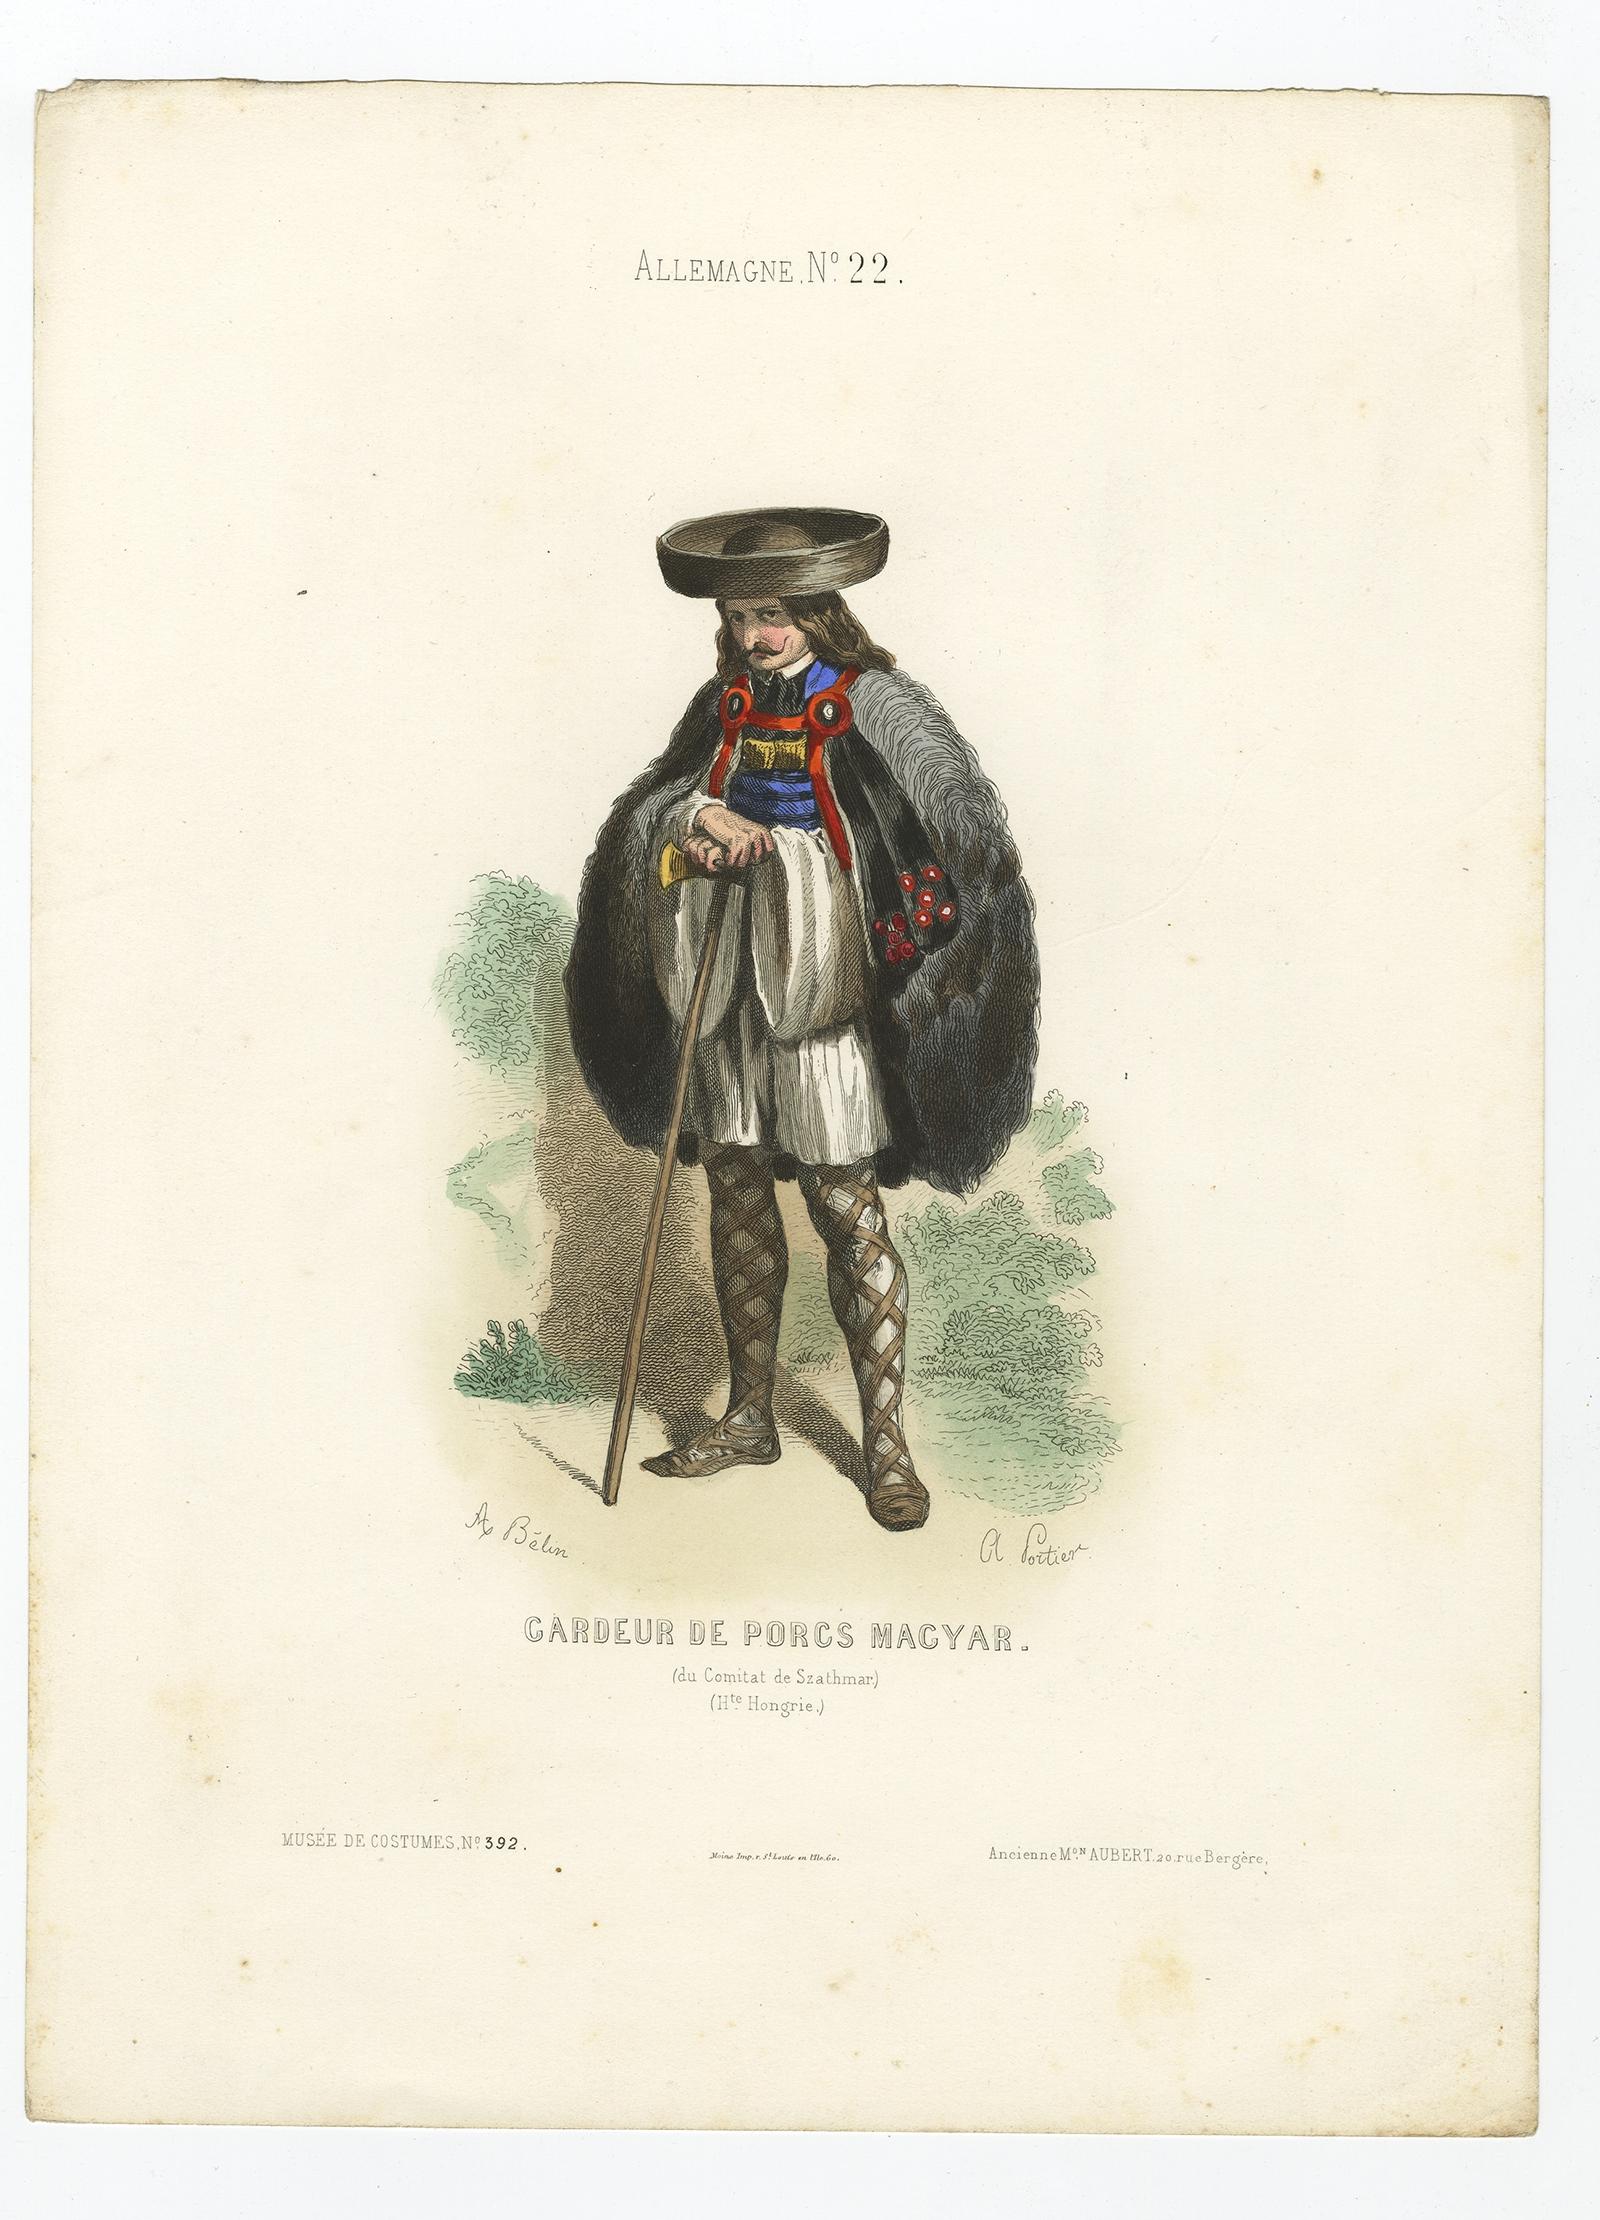 Antique costume print titled 'Gardeur de Porcs Magyar'. 

The Mangalica (also Mangalitsa or Mangalitza) is a Hungarian breed of domestic pig. It was developed in the mid 19th century by crossbreeding Hungarian breeds from Nagyszalonta and Bakony